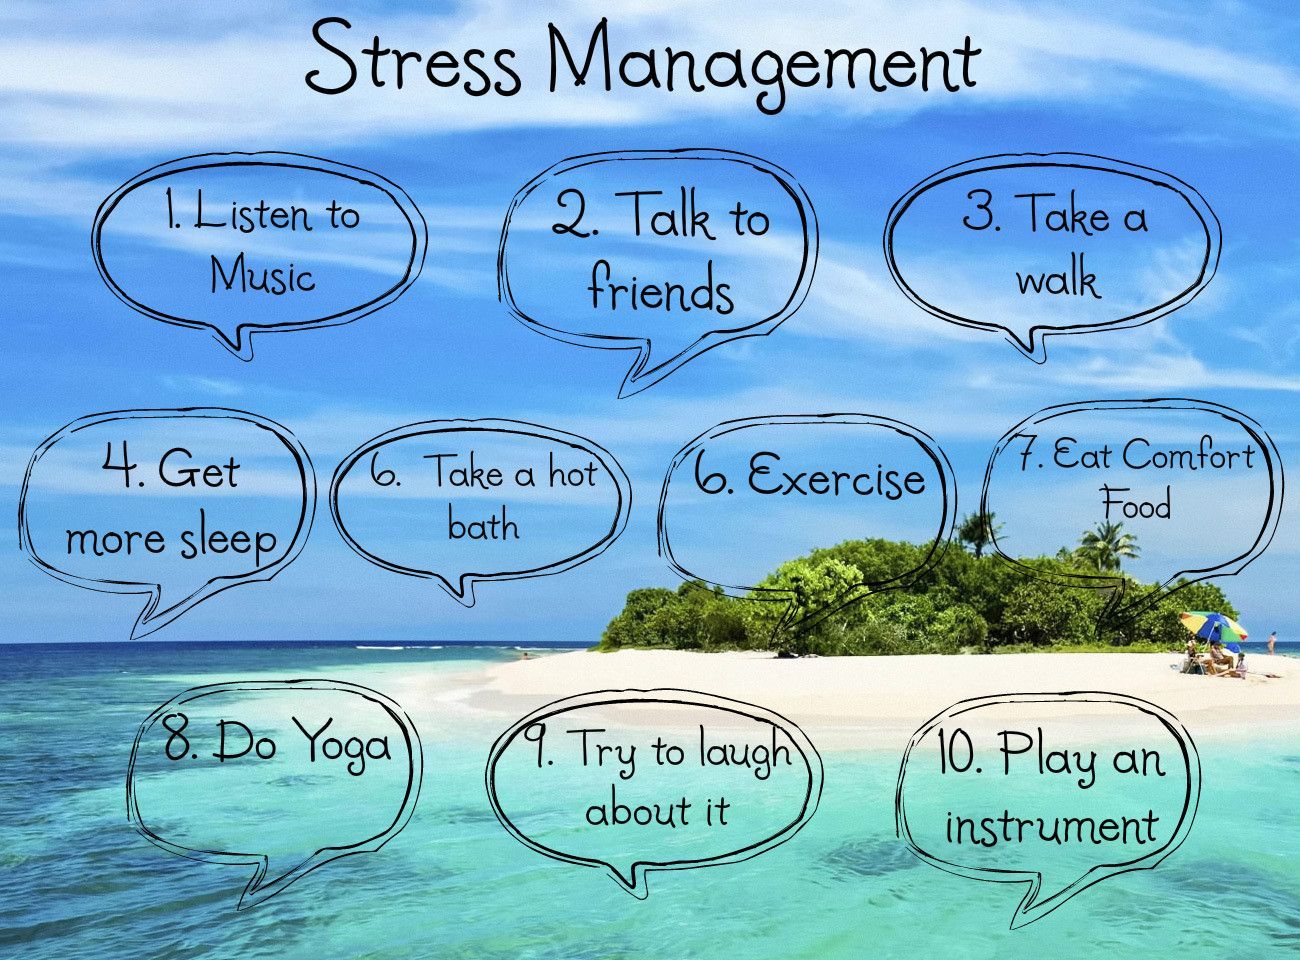 We can managed. Ways to Relax. Managing stress. Ways to reduce stress. To relieve stress.